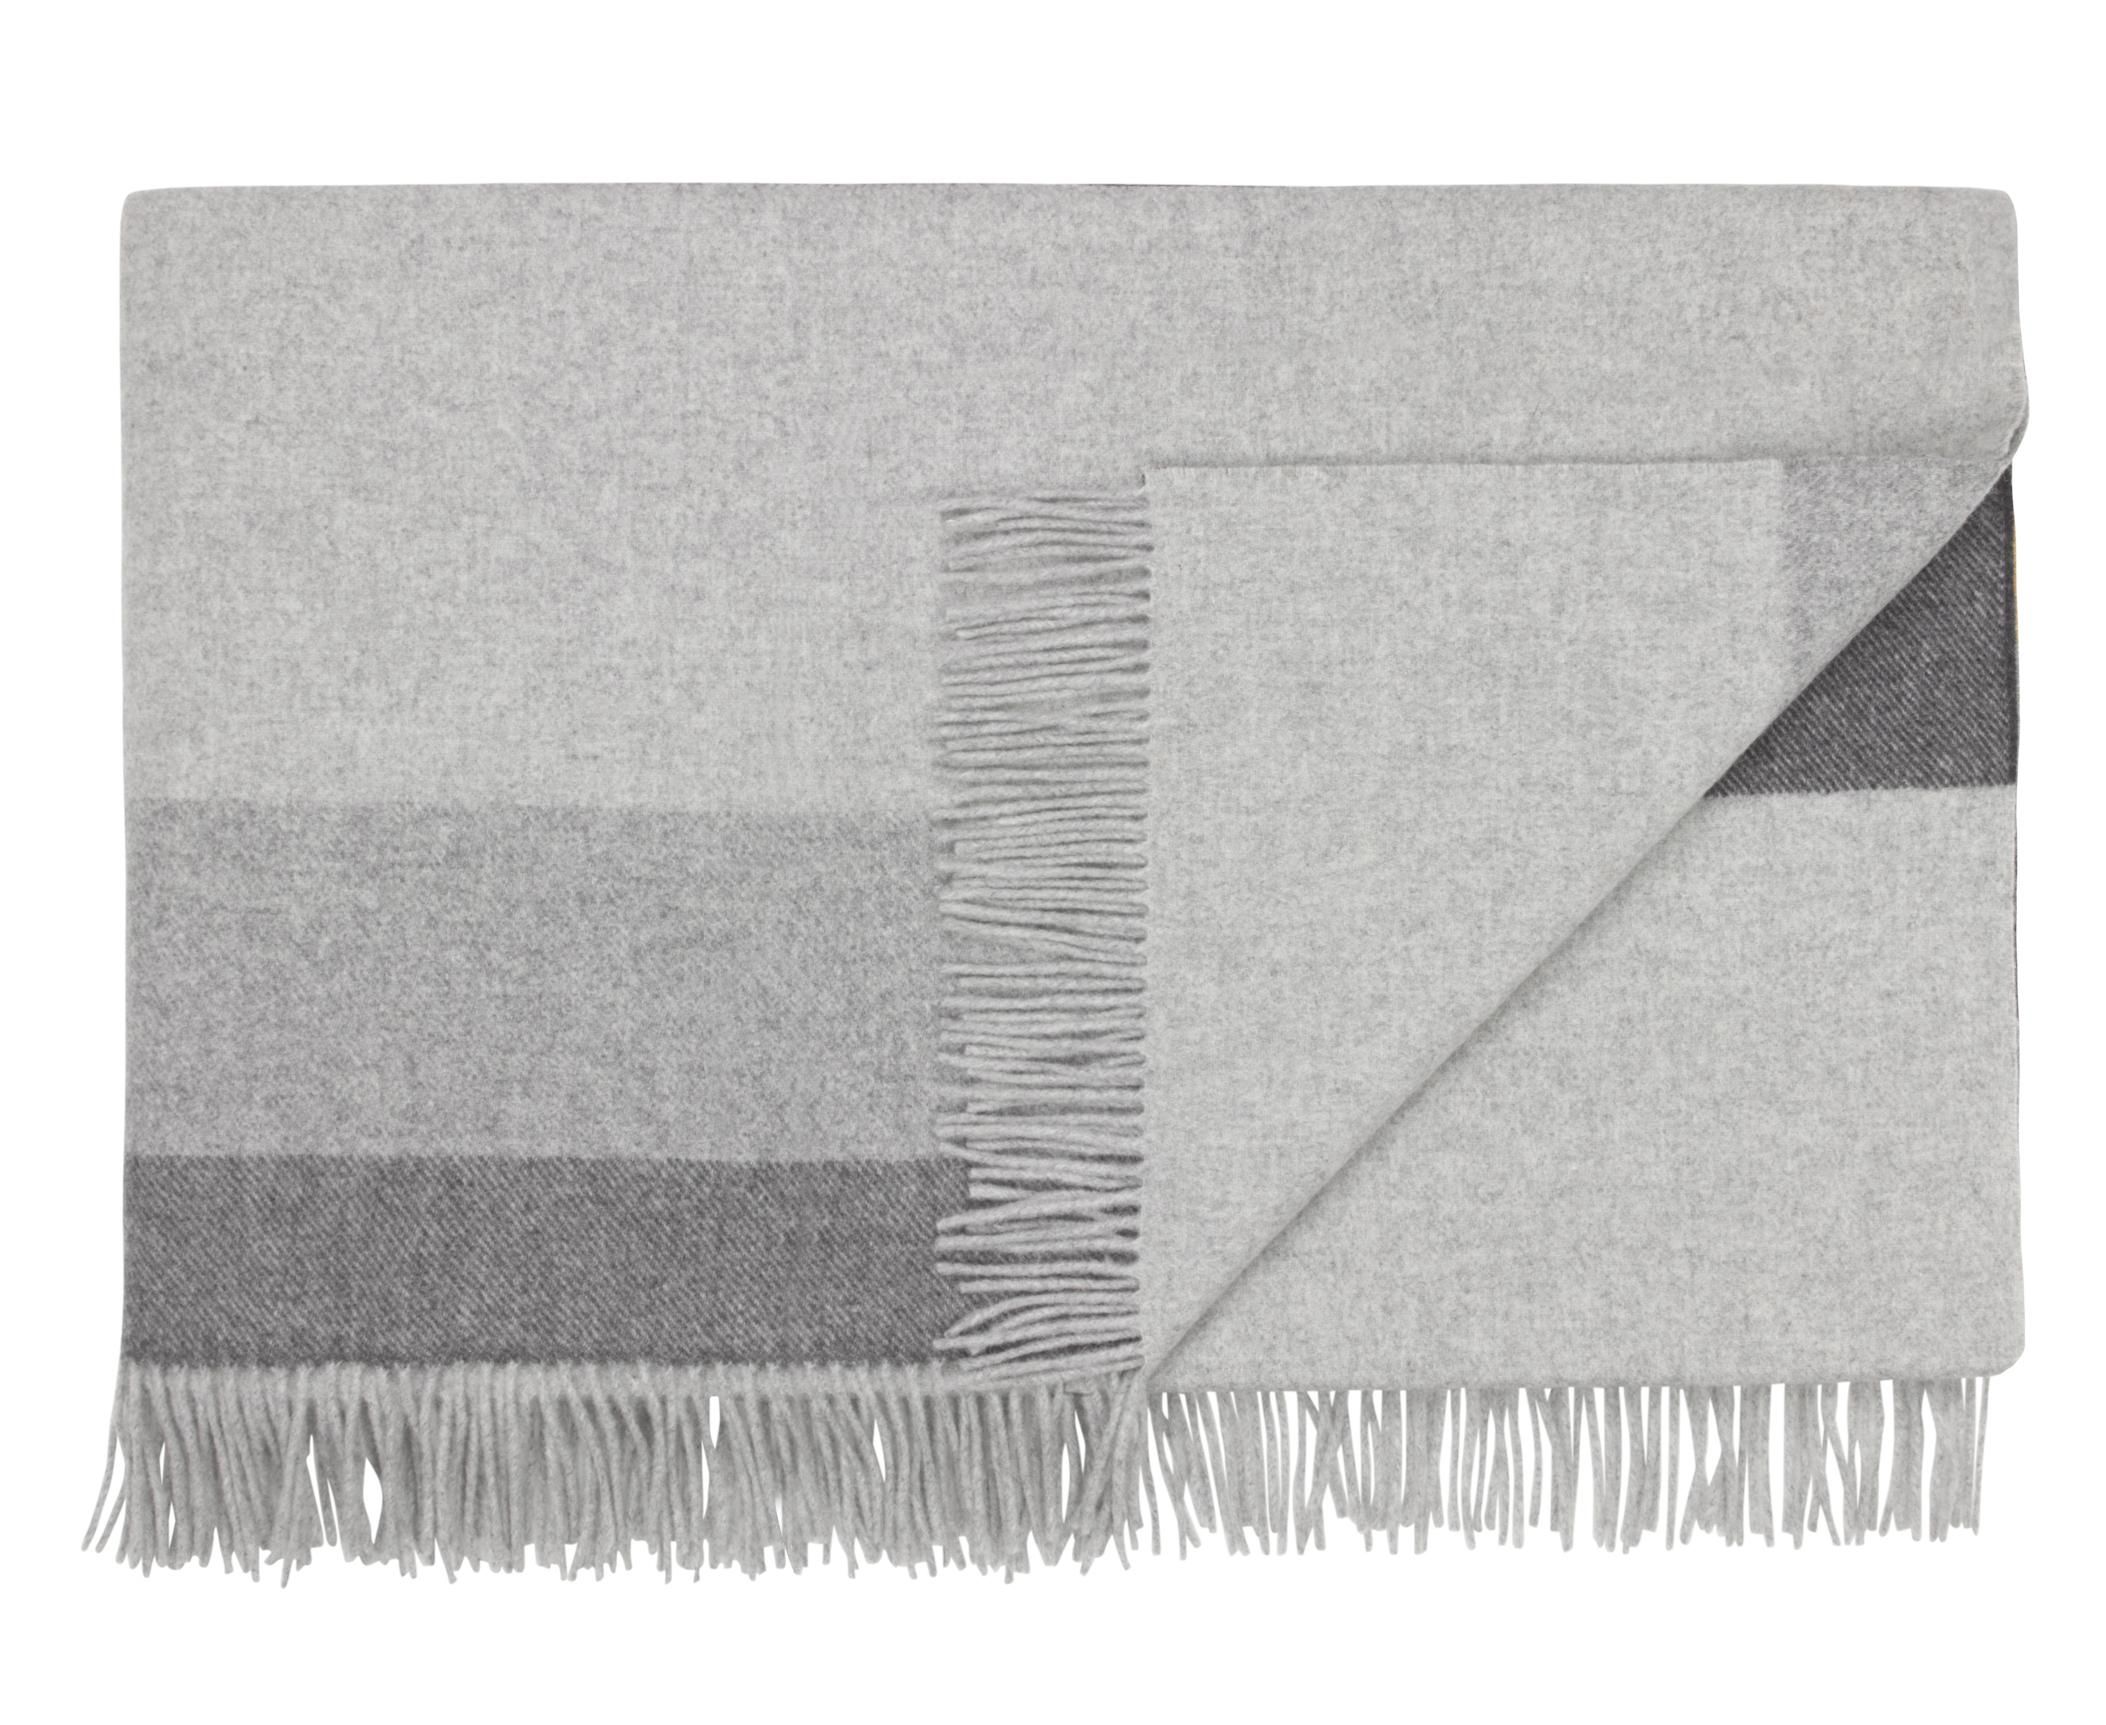 Blankets, Throws & Slippers | Snug Bedspreads | Loaf Throughout Grey Throws For Sofas (View 18 of 20)